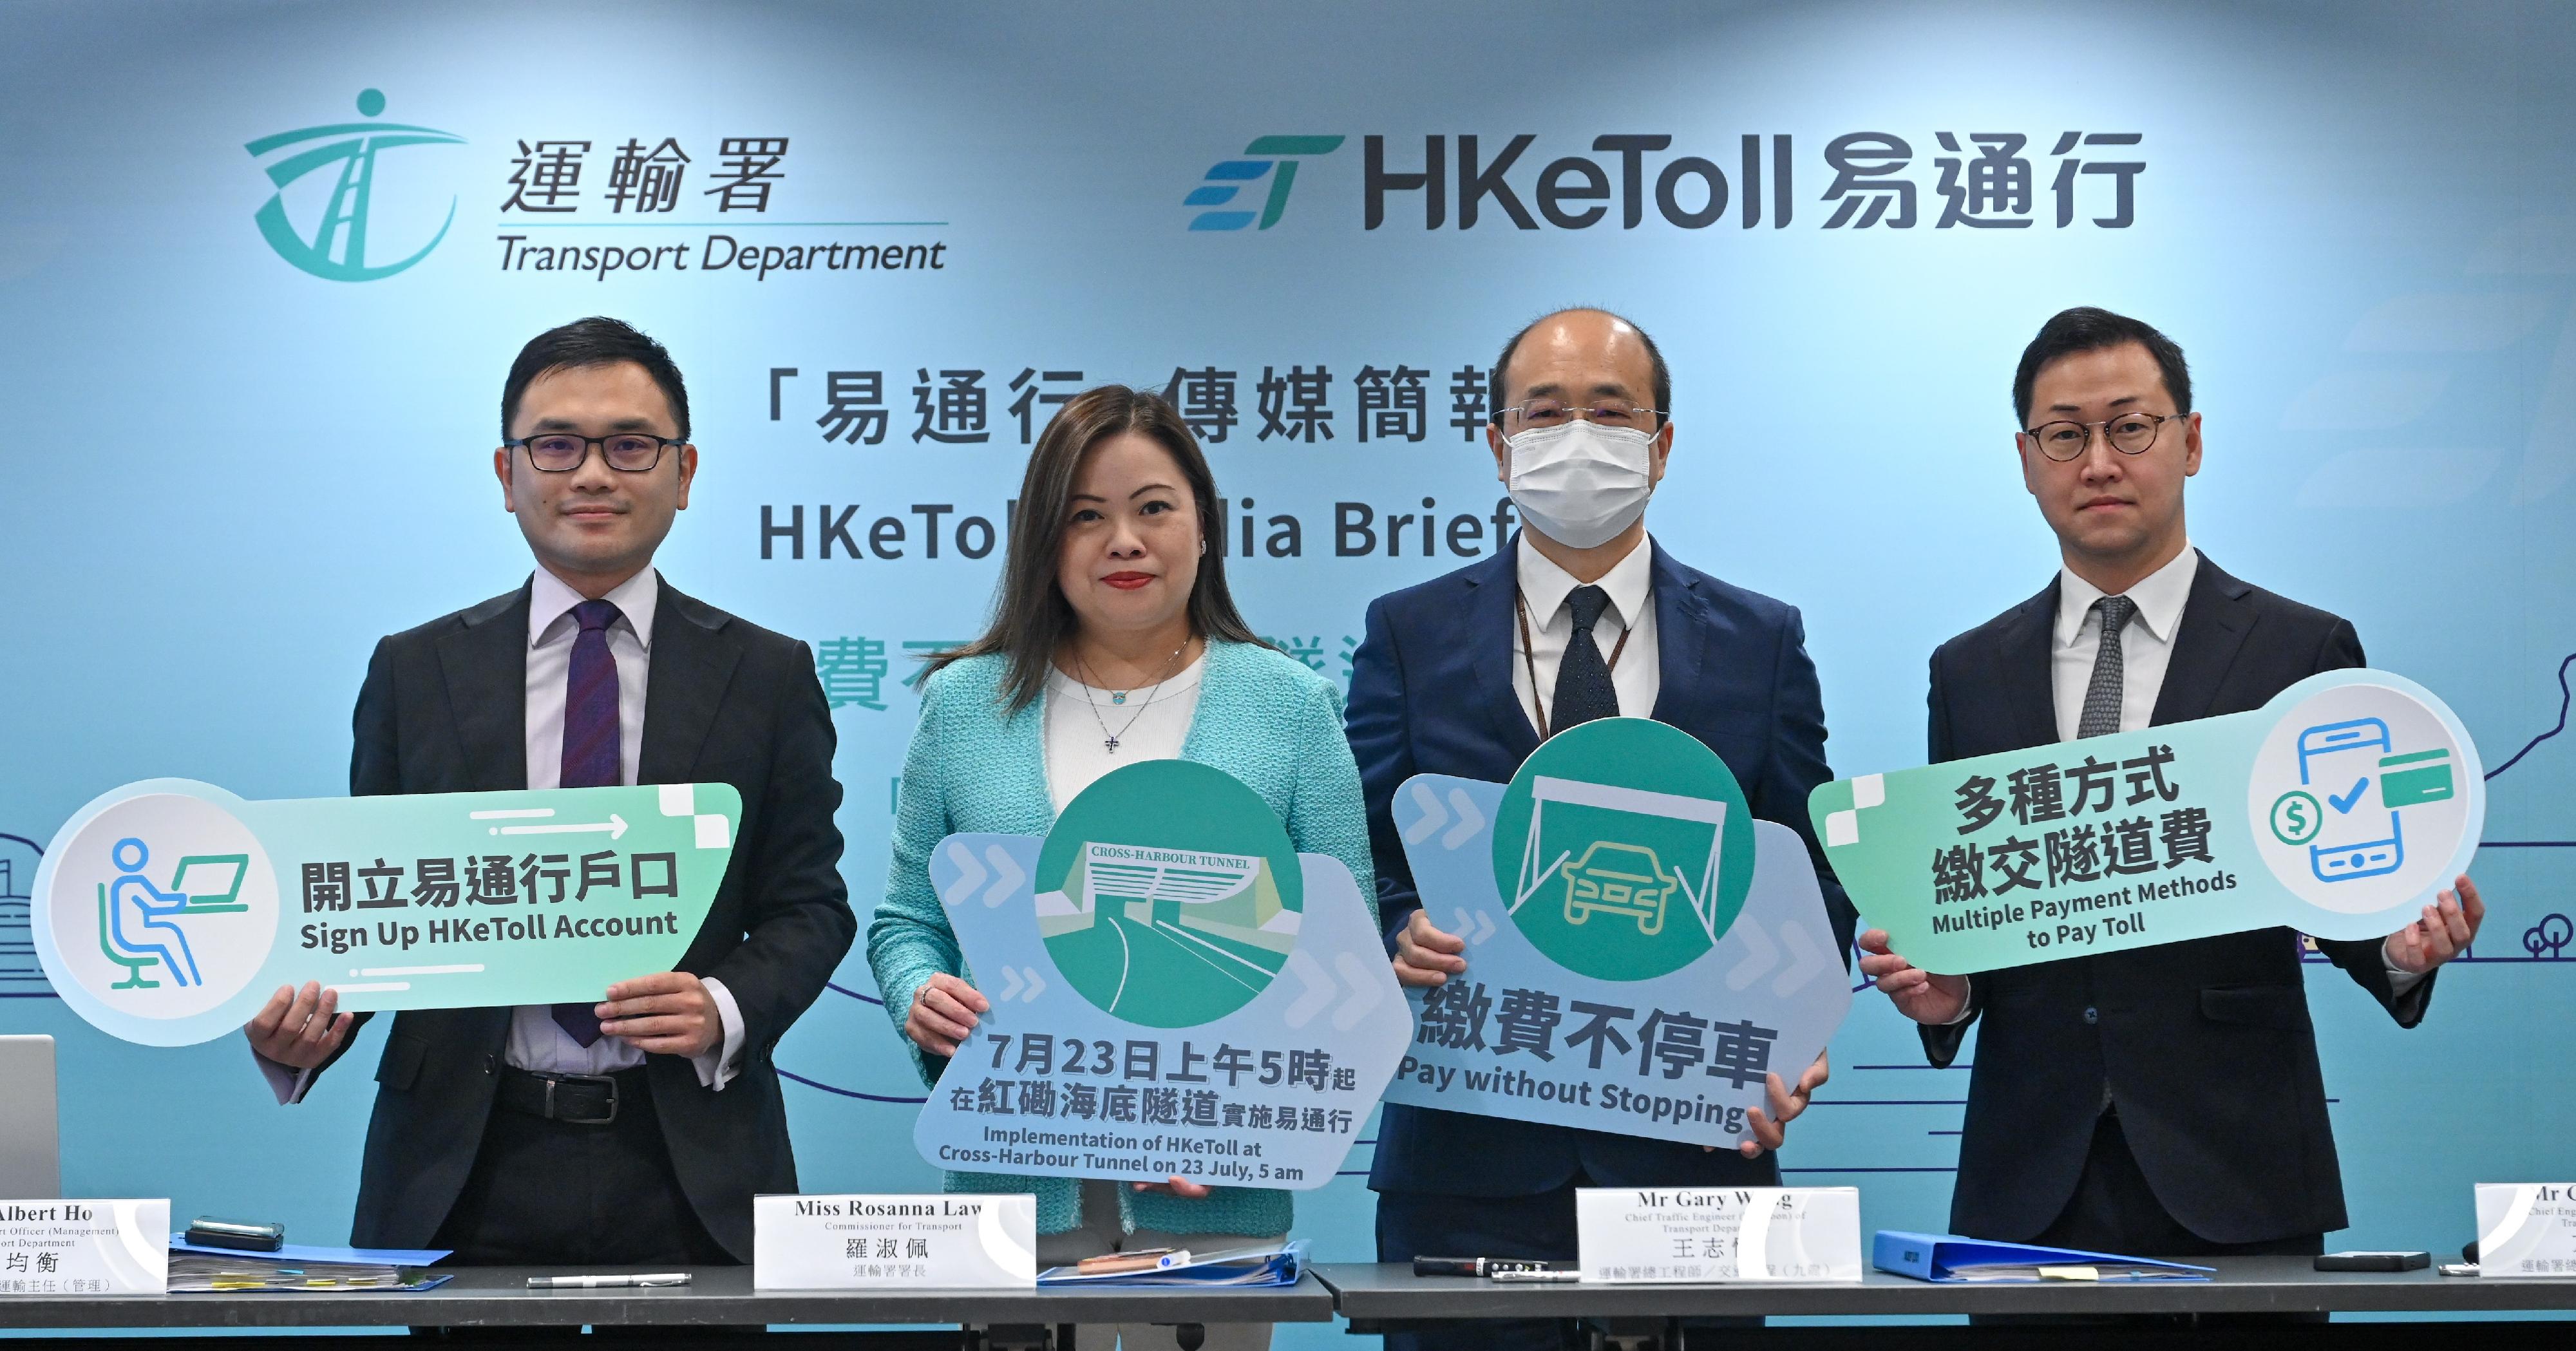 The Commissioner for Transport, Miss Rosanna Law (second left); the Principal Transport Officer (Management), Mr Albert Ho (first left); the Chief Traffic Engineer (Kowloon), Mr Gary Wong (second right); and the Chief Engineer (Smart Mobility), Mr George Fong (first right), of the Transport Department held a briefing today (July 20) to introduce the implementation of the HKeToll in the Cross-Harbour Tunnel from 5am on July 23.